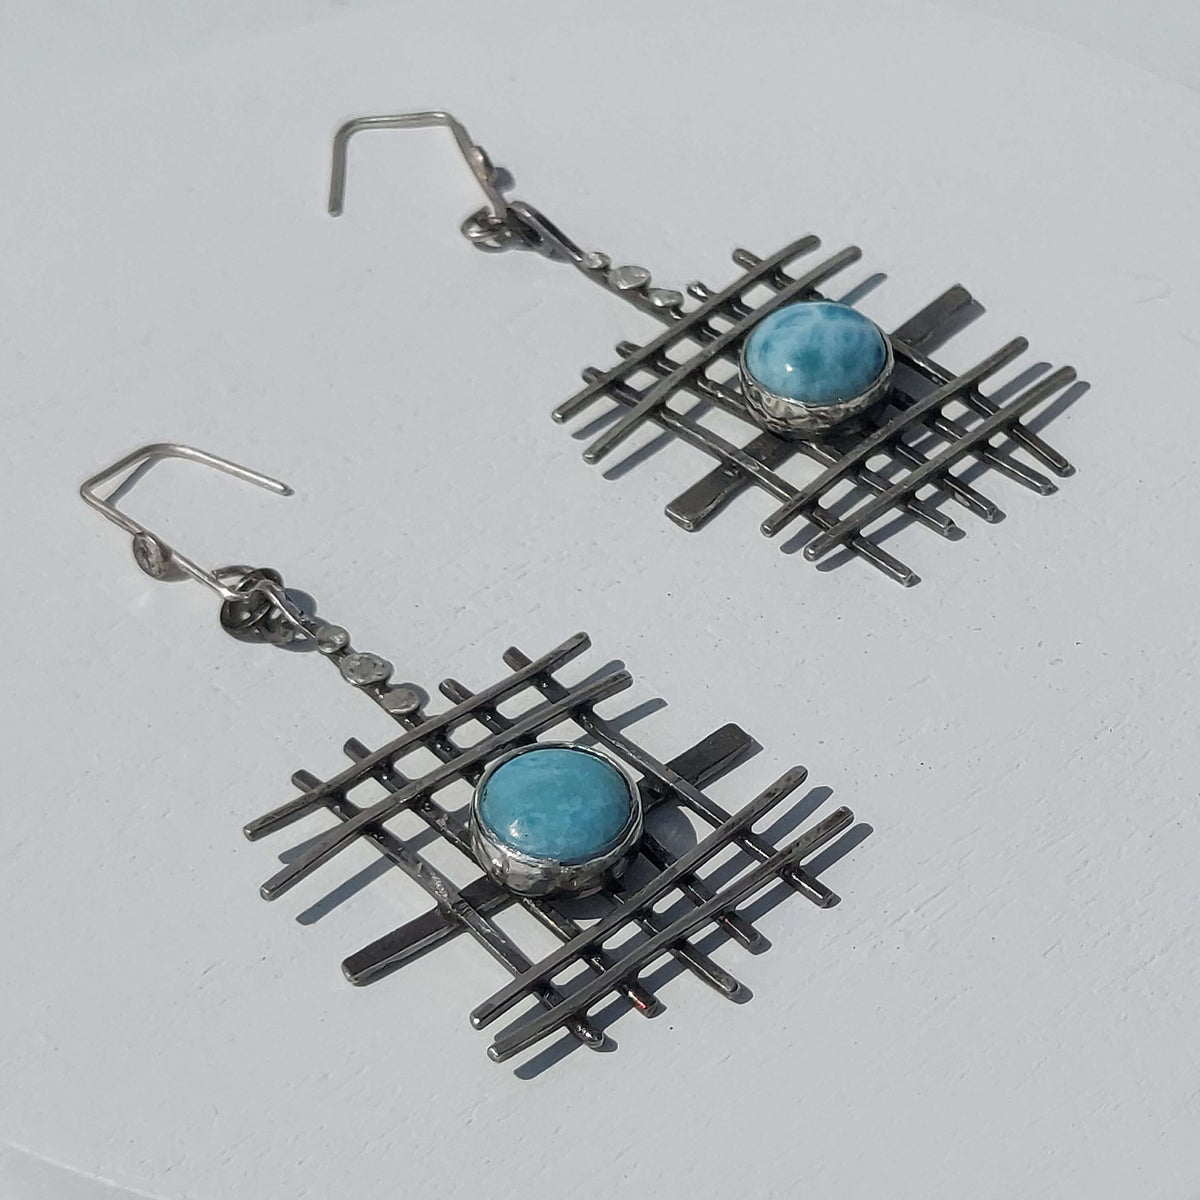 Square grit earrings with round larimar gemstones. Handcrafted silver earrings by roff jewellery